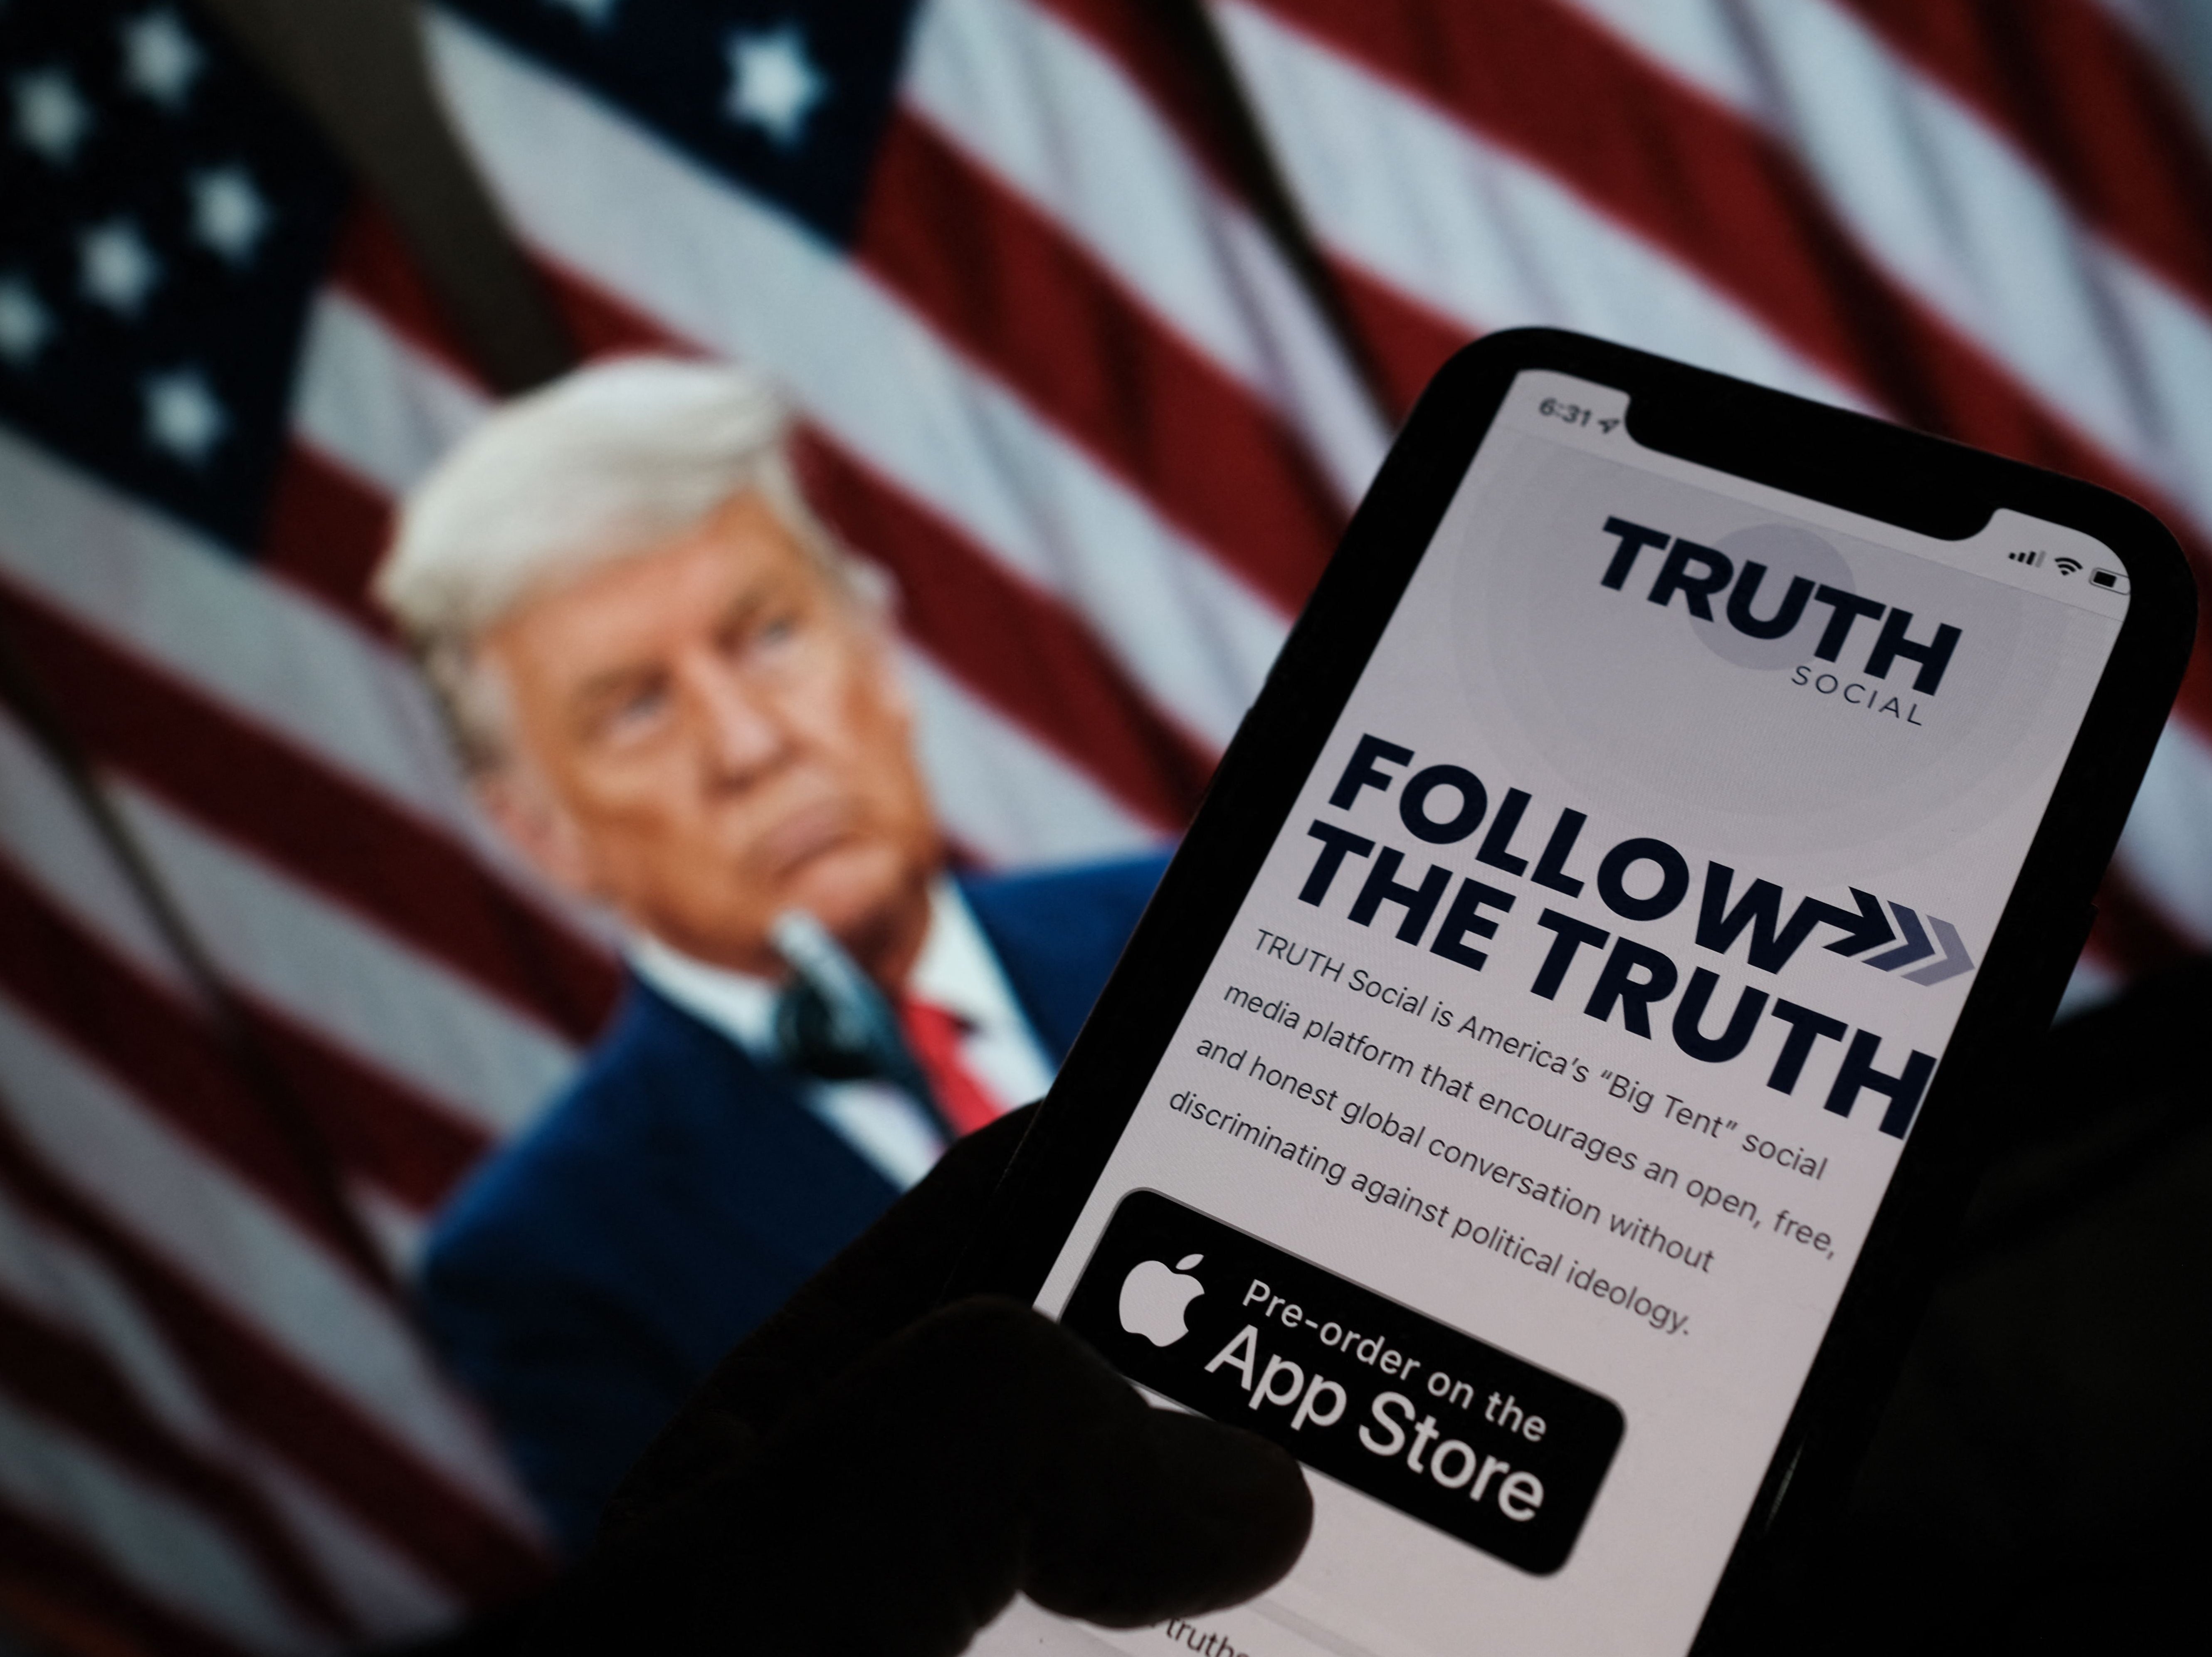 TRUTH Social is Donald Trump’s new social network